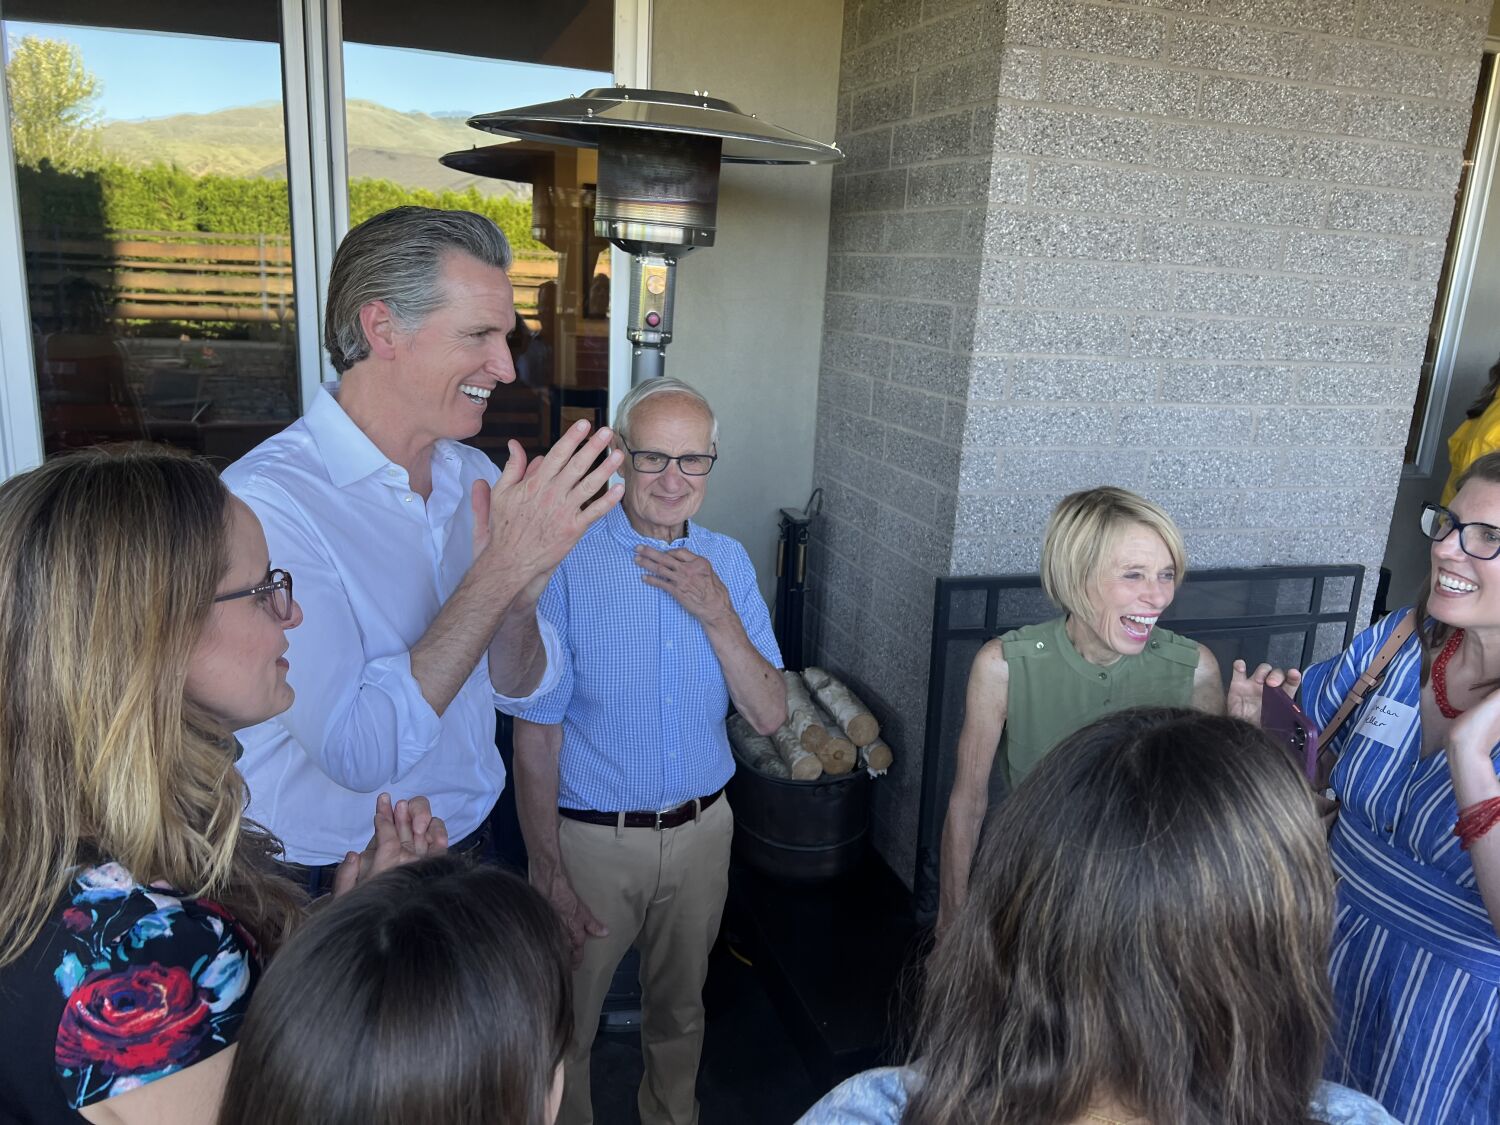 Newsom hits the road to campaign for Biden in Idaho, building his own base in red states